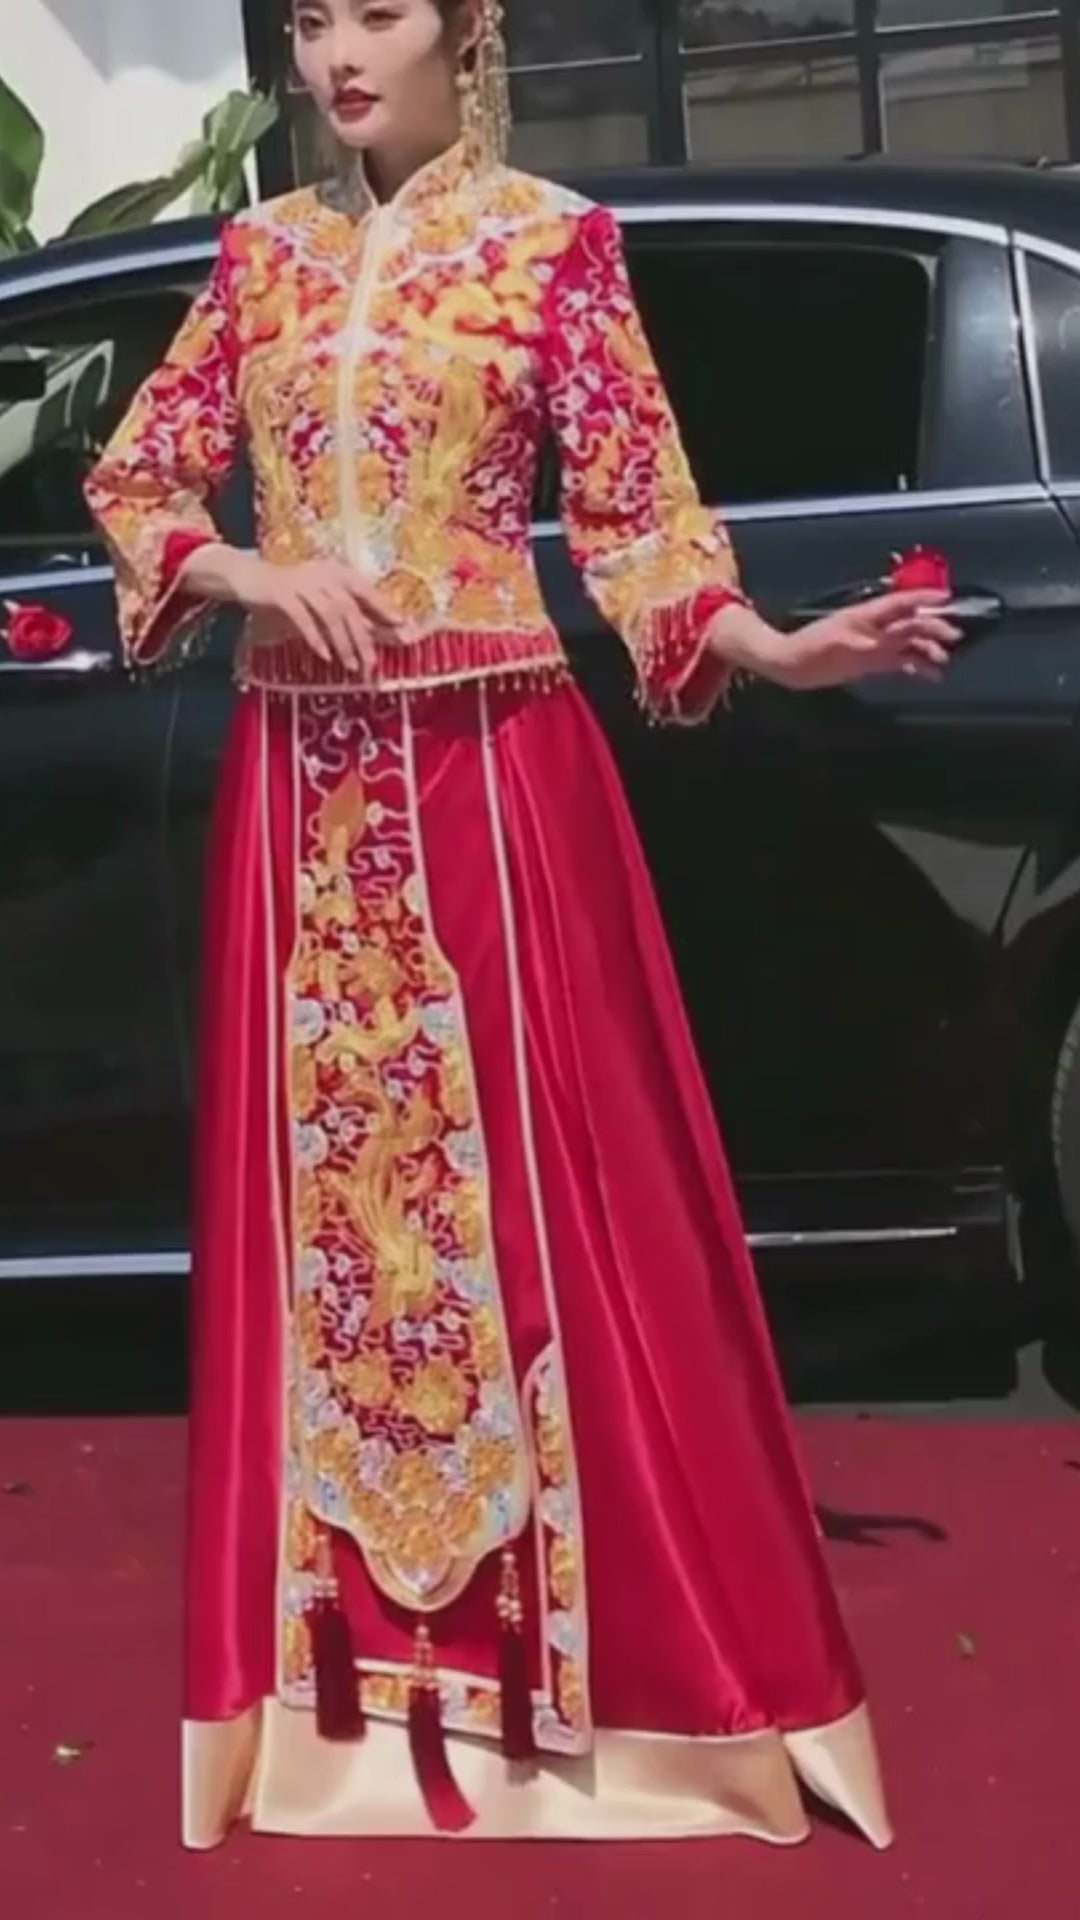 Coat and Skirt Wedding Qun Kua 龍鳳卦/秀禾服 With Golden Pattern for Bride in Elegant Red Color